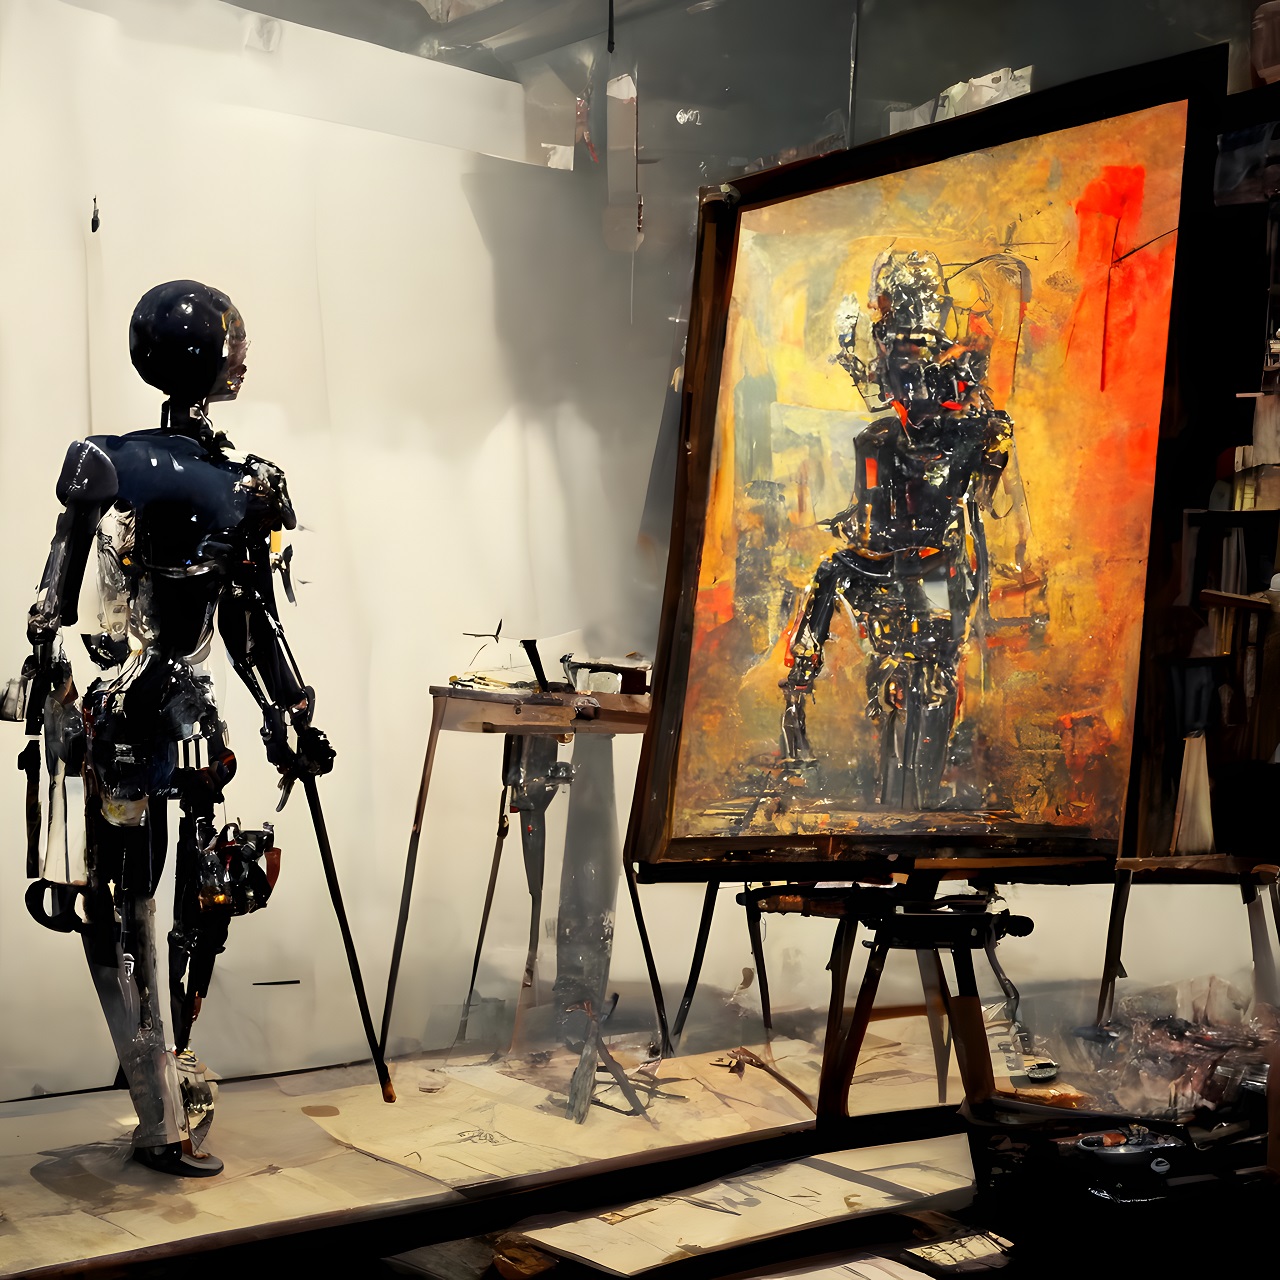 Anthropomorphic robot artist in the studio next to the easel, painting and paints while working - neural network generated art, picture produced with ai in 2022. The rise of ai art